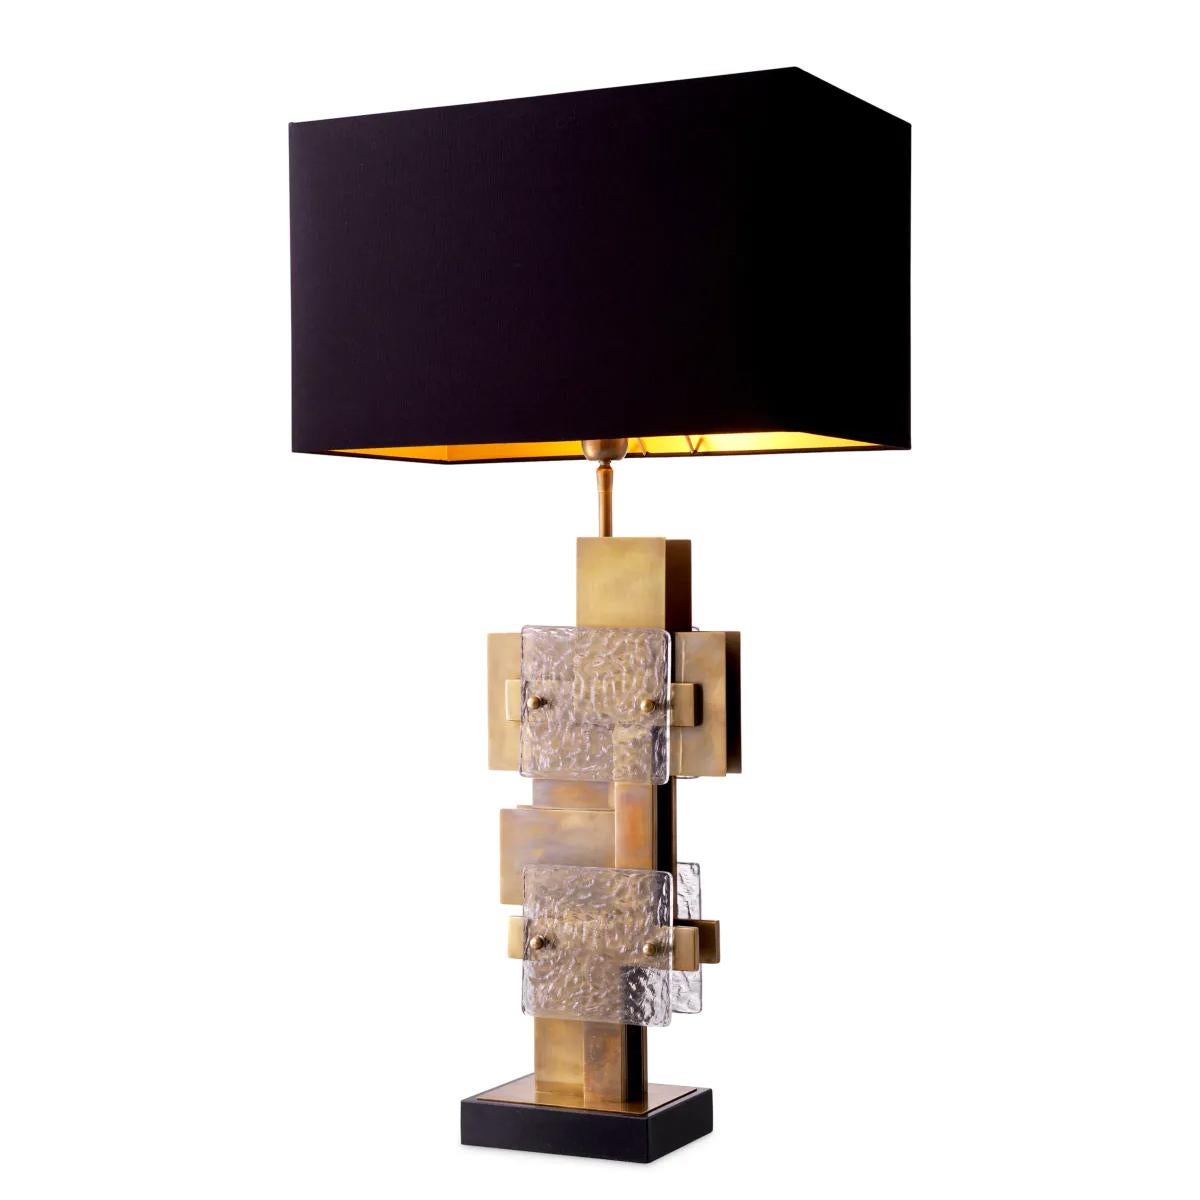 Table Lamp Retro Barnes with structure in solid brass in antique
finish, with frosted clear glass plates, with black granite base. With
1 black cotton shade included. Lamp holder type E27, max 40 watt,
1 bulb, bulb not included.